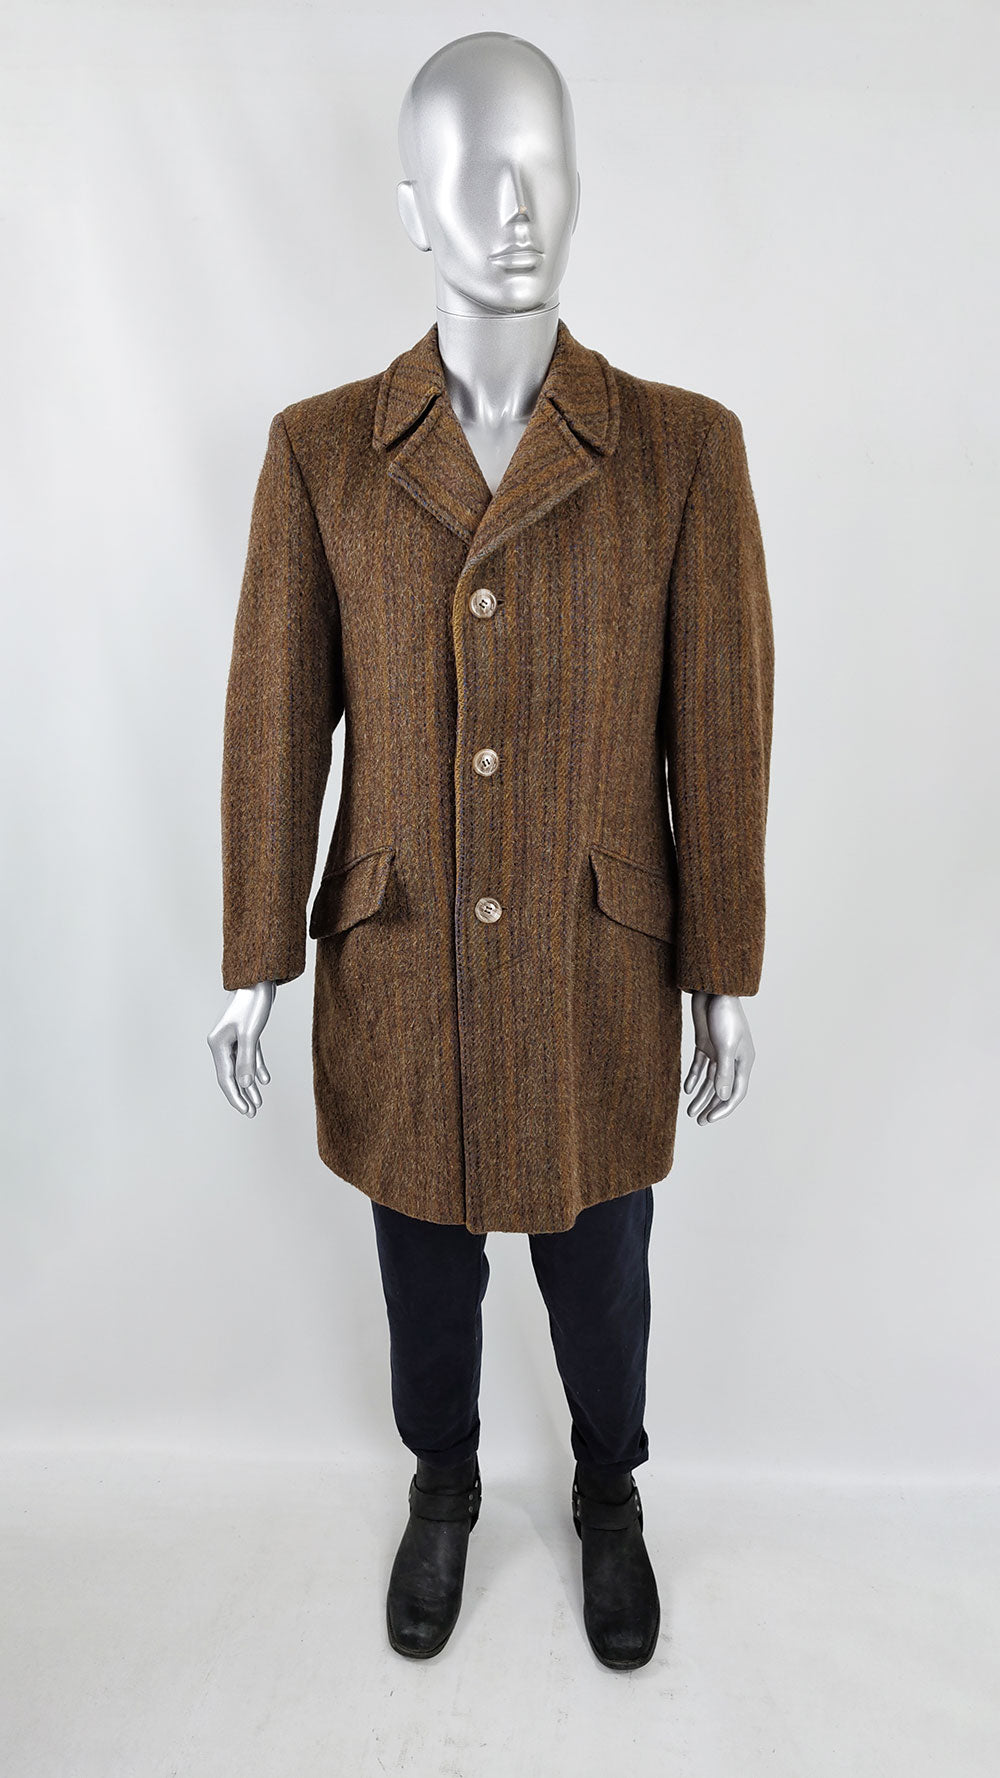 A 1970s Alexandre of London vintage fuzzy wool and cashmere overcoat.